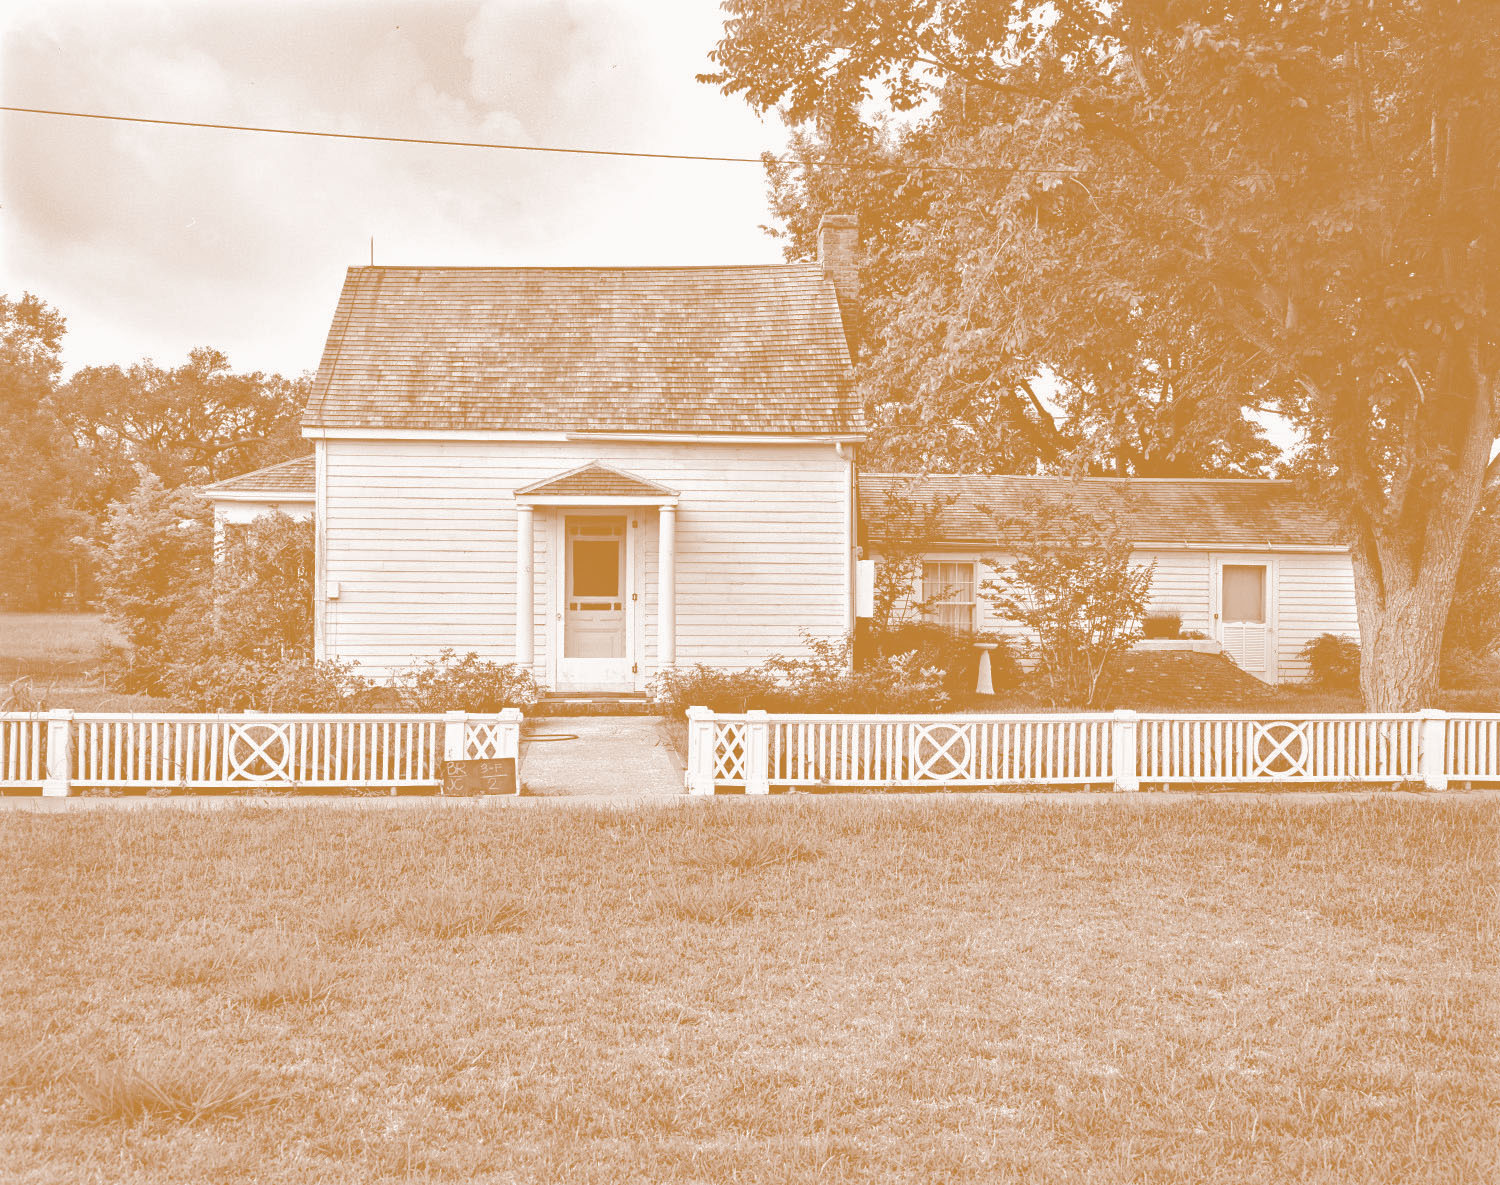 Sepia-toned house with white siding and gray shingled roof, wooden fence, trees, and grass